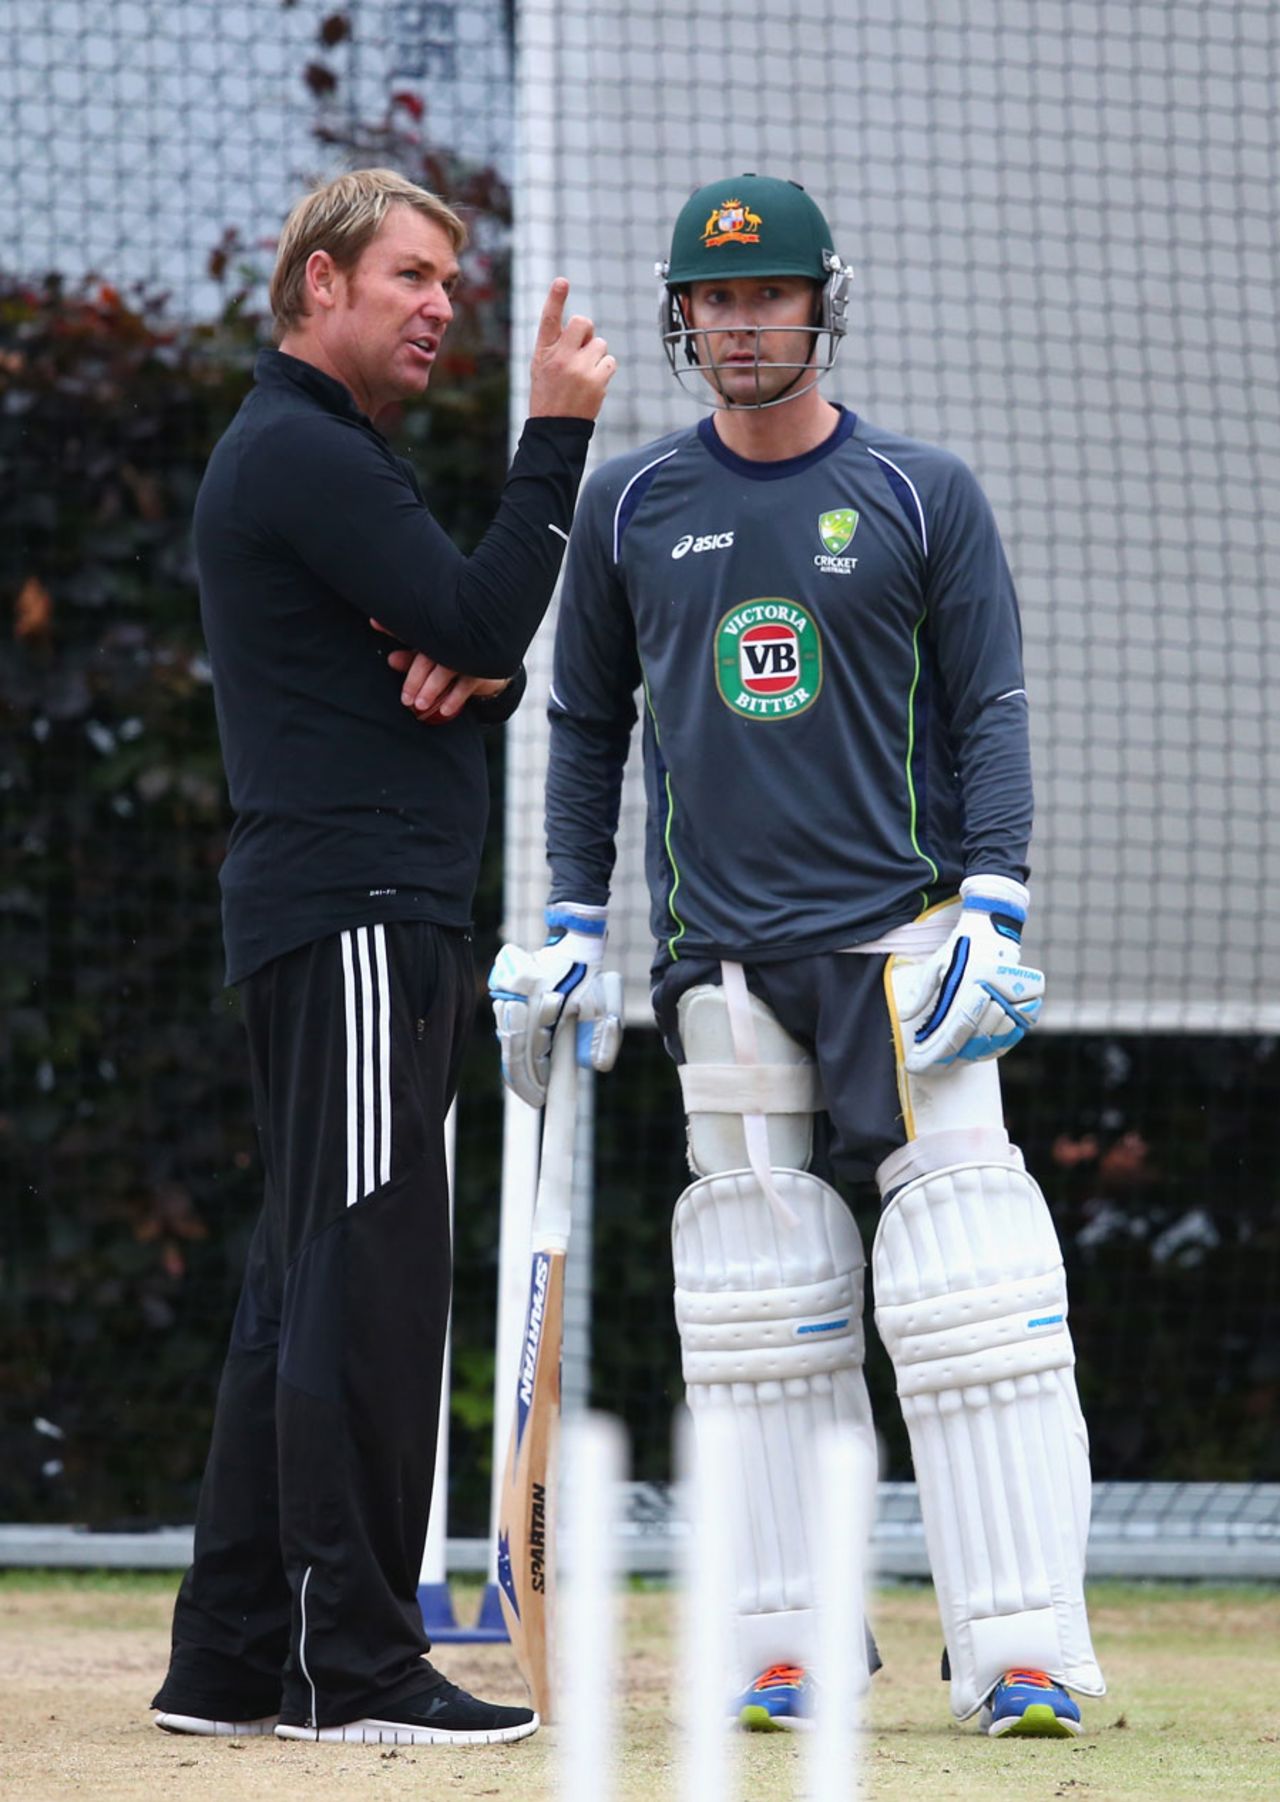 Shane Warne chats with Michael Clarke during Australia practice, England v Australia, 3rd Investec Test, Old Trafford, July 31, 2013